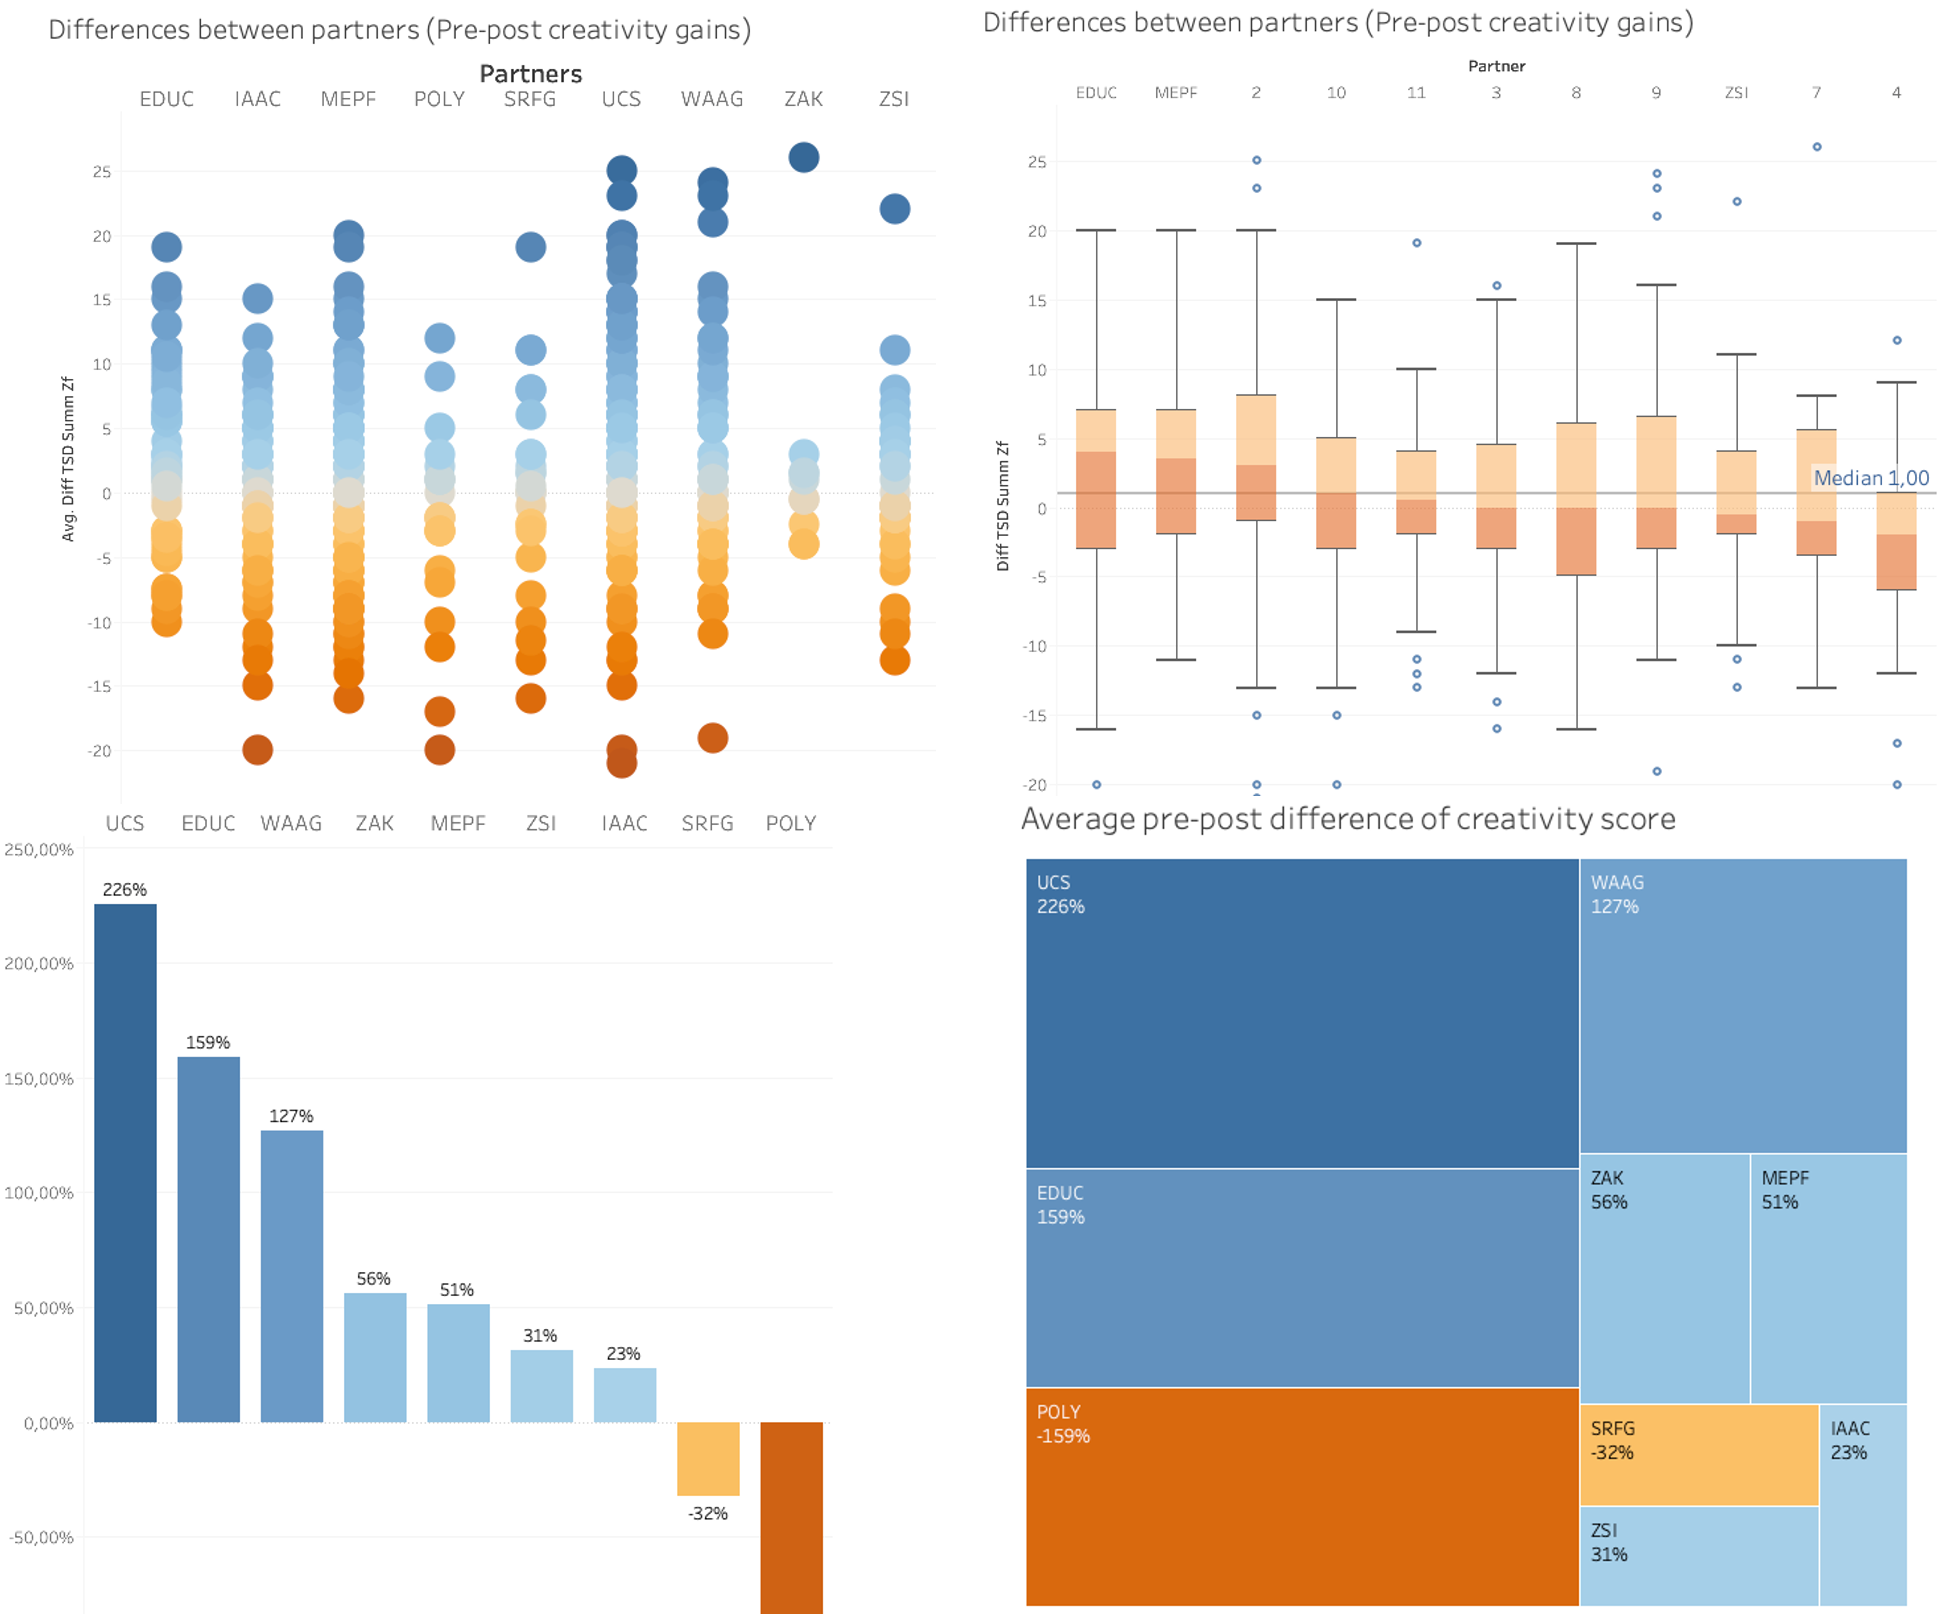 Tableau: Five questions to check your visualizations